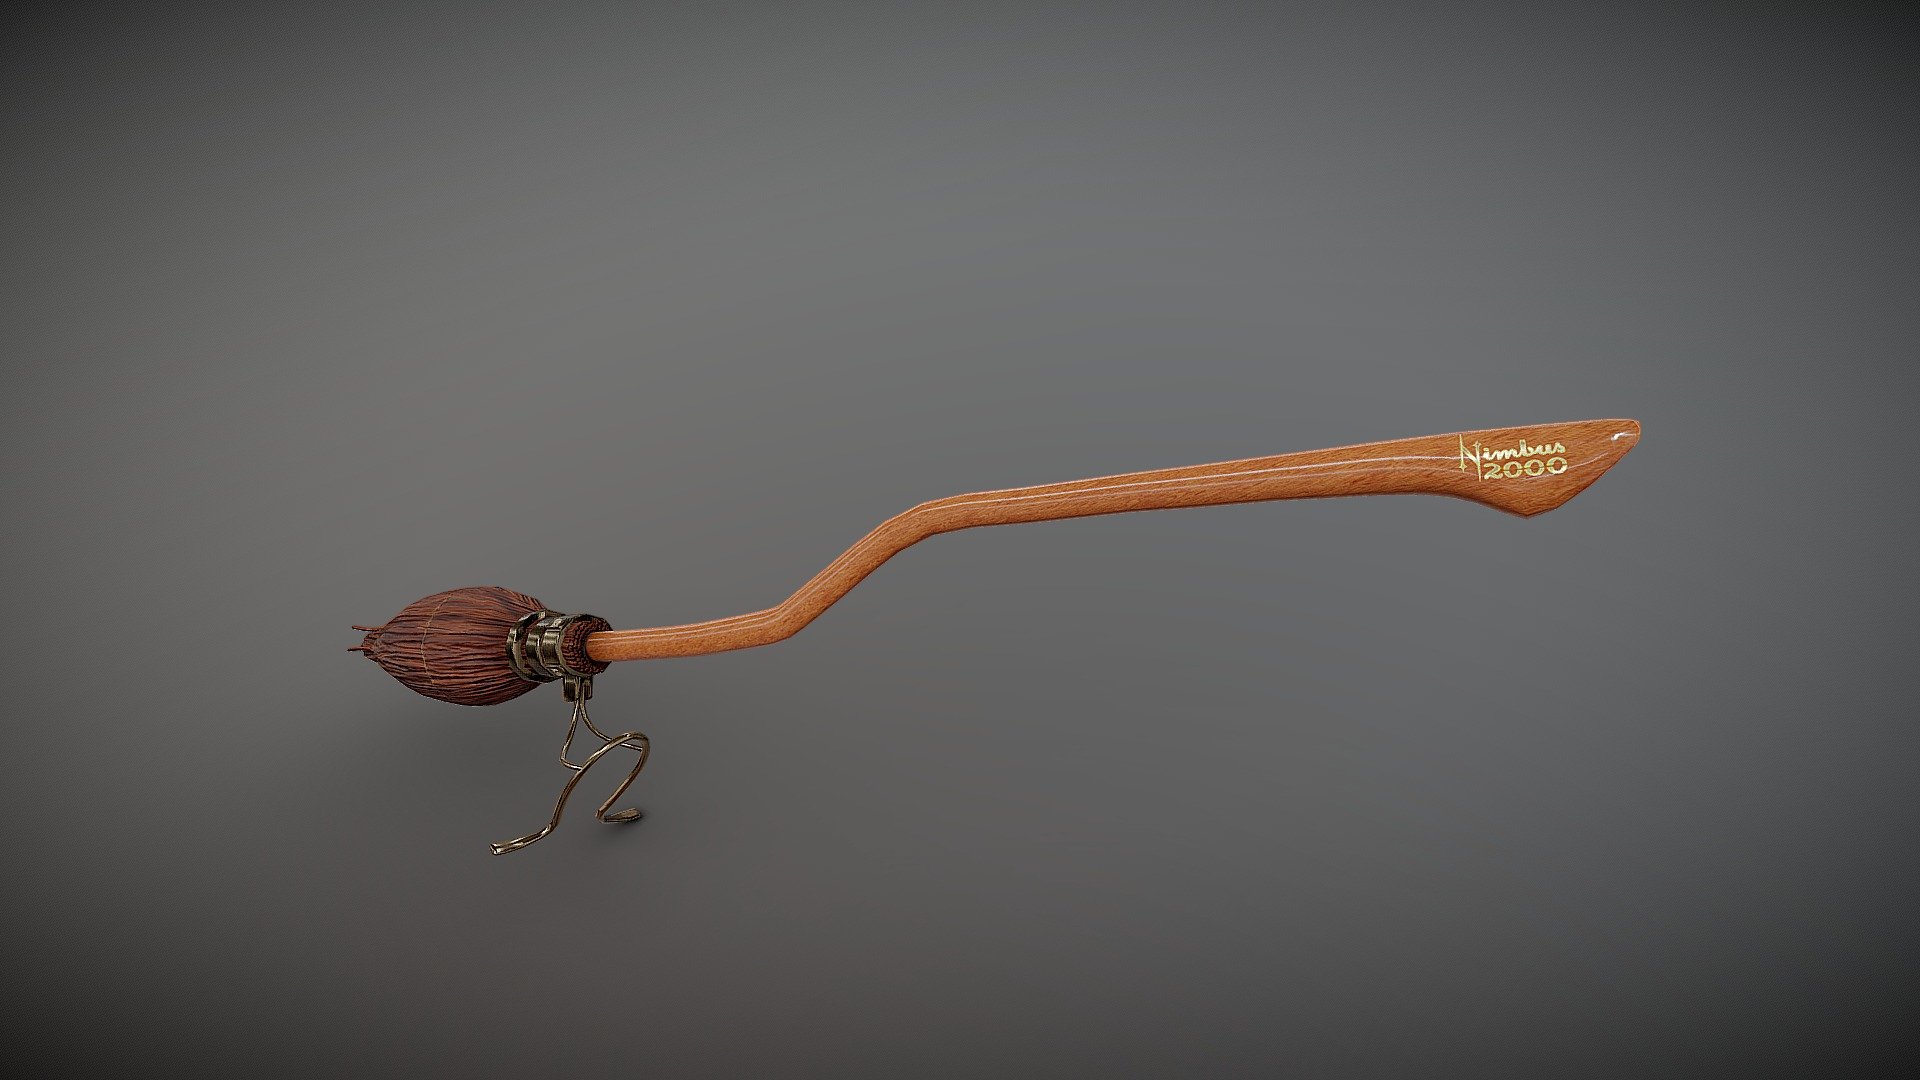 The Nimbus 2000 was a broomstick produced by the Nimbus Racing Broom Company as part of their successful line of racing brooms. At the time of its release in 1991, it was the fastest broomstick in production. The Nimbus 2000 easily outperformed its competitors on the Quidditch pitch until it was replaced as the top broomstick by the Nimbus 2001 3d model